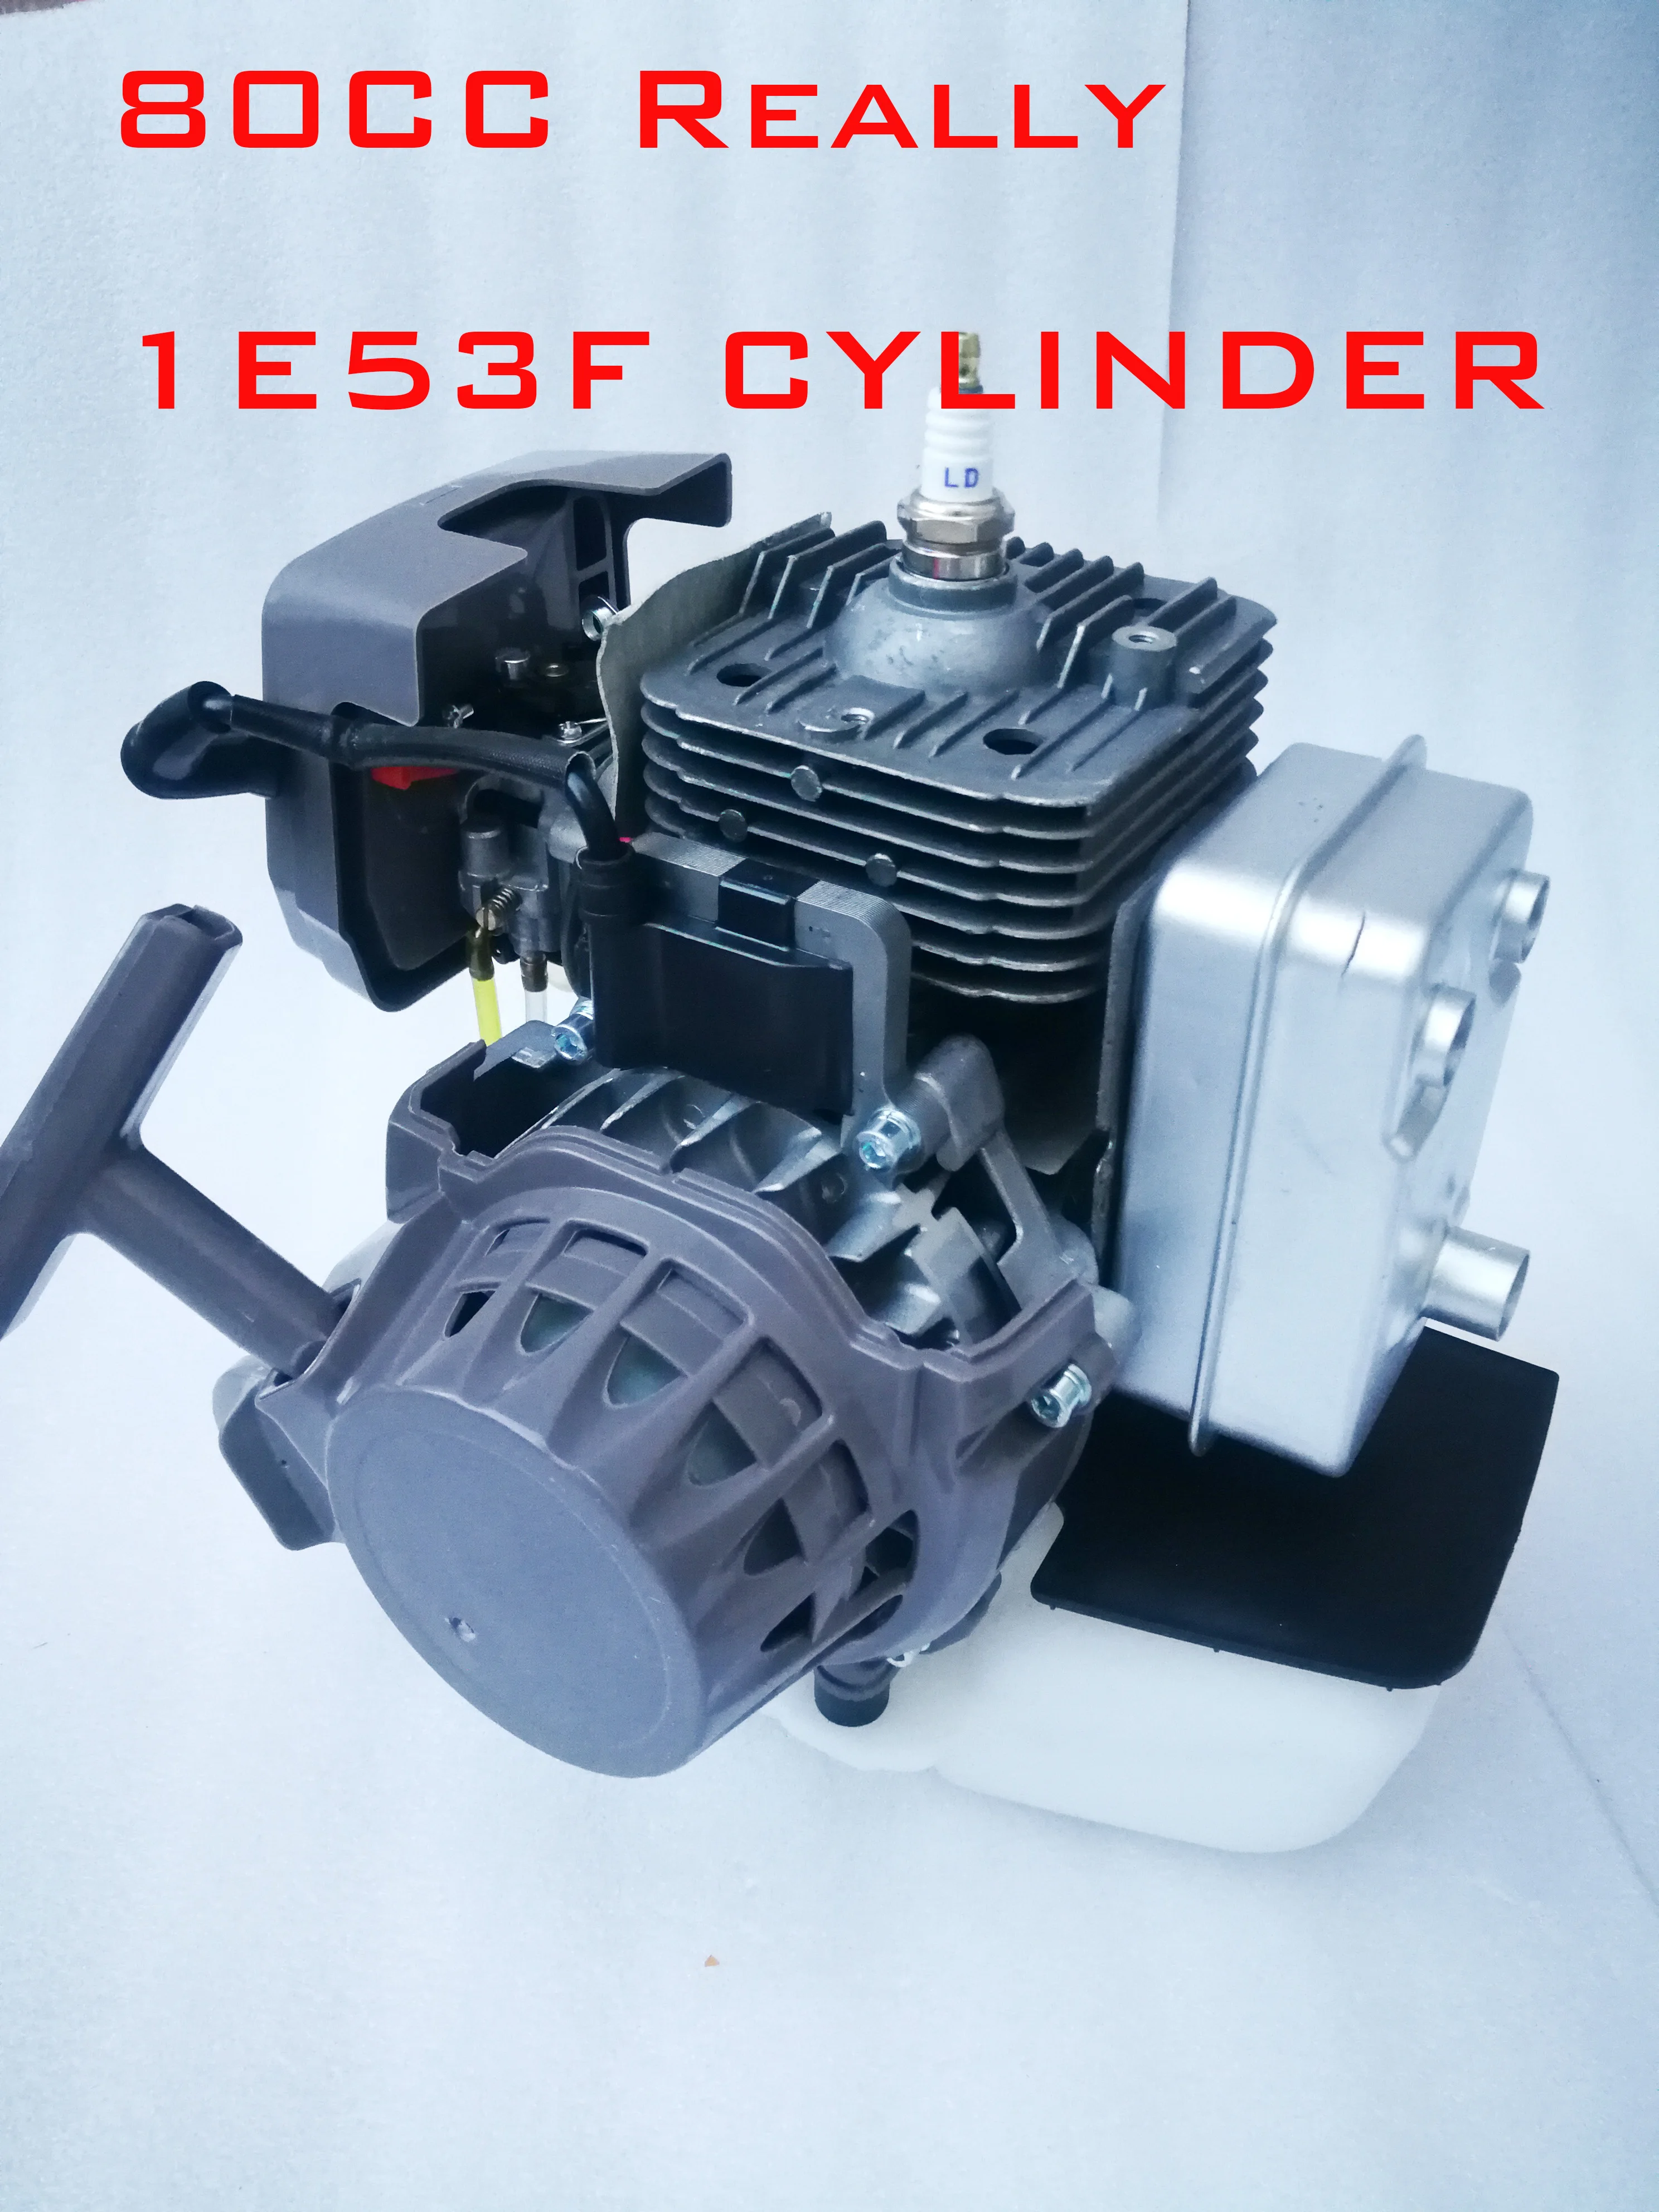 Really 80cc 1E53F 2T Gasoline Engine 2 Stroke For Earth Drill Brush Cutter Goped Scooter Outboard Motor 53mm Big Bore enlarge